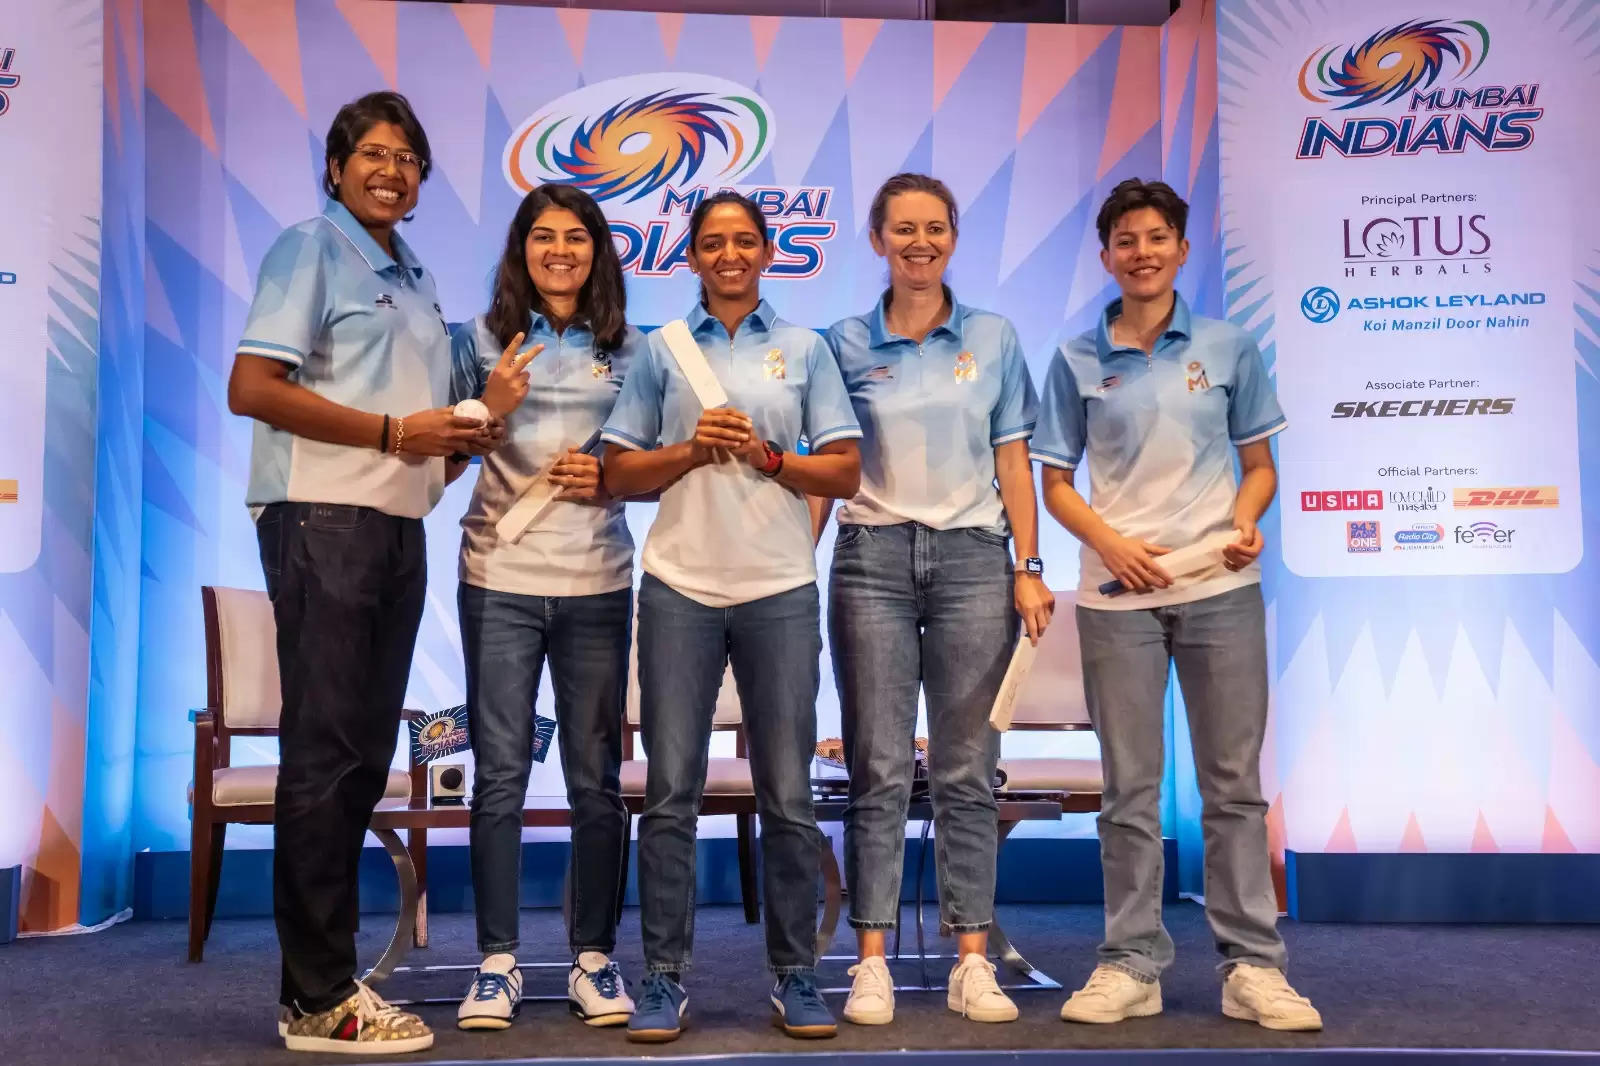 Mumbai Indians captain Harmanpreet Kaur feels that adapting to different conditions will be the key to retain the title in the upcoming Women's Premier League (WPL). WPL will be played from 23 February to 17 March in Bengaluru and New Delhi.